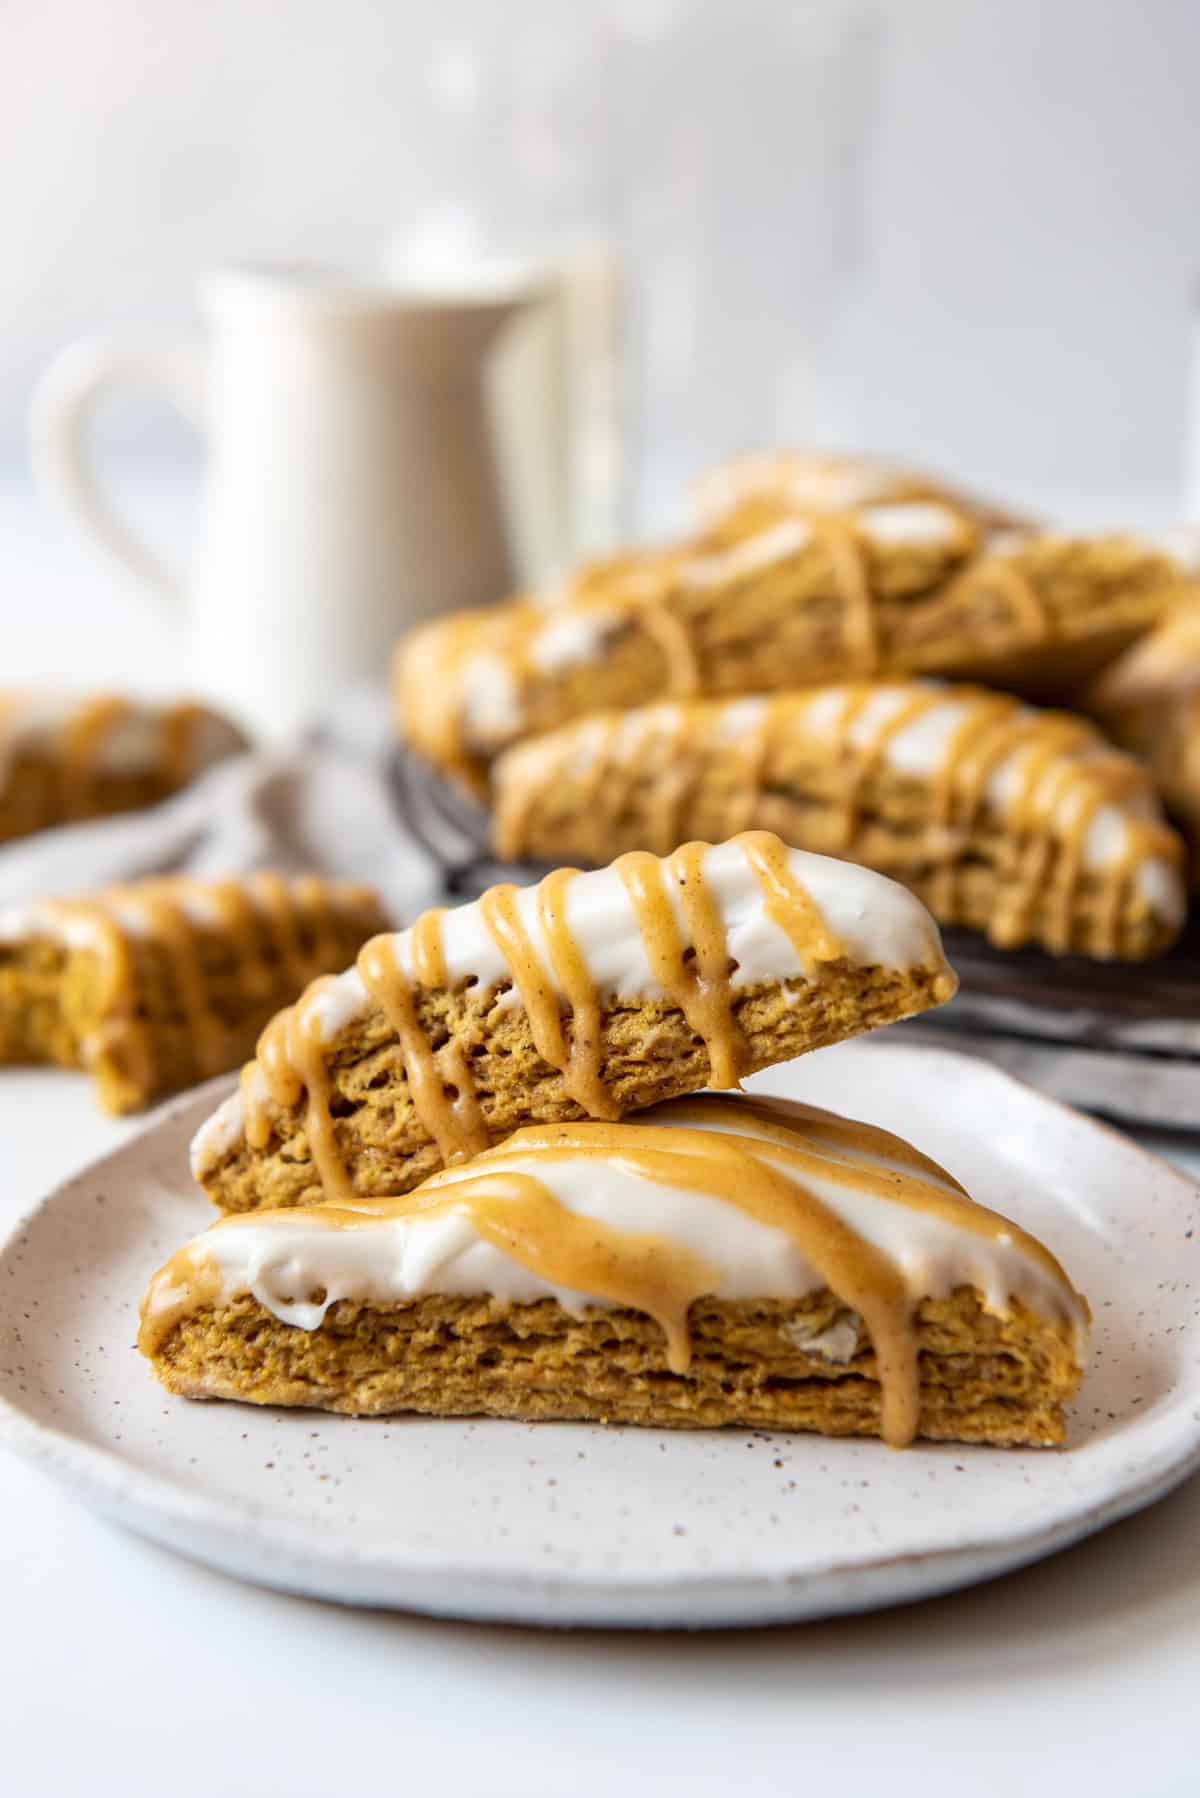 Two copycat Starbucks pumpkin scones on a plate with more behind them.